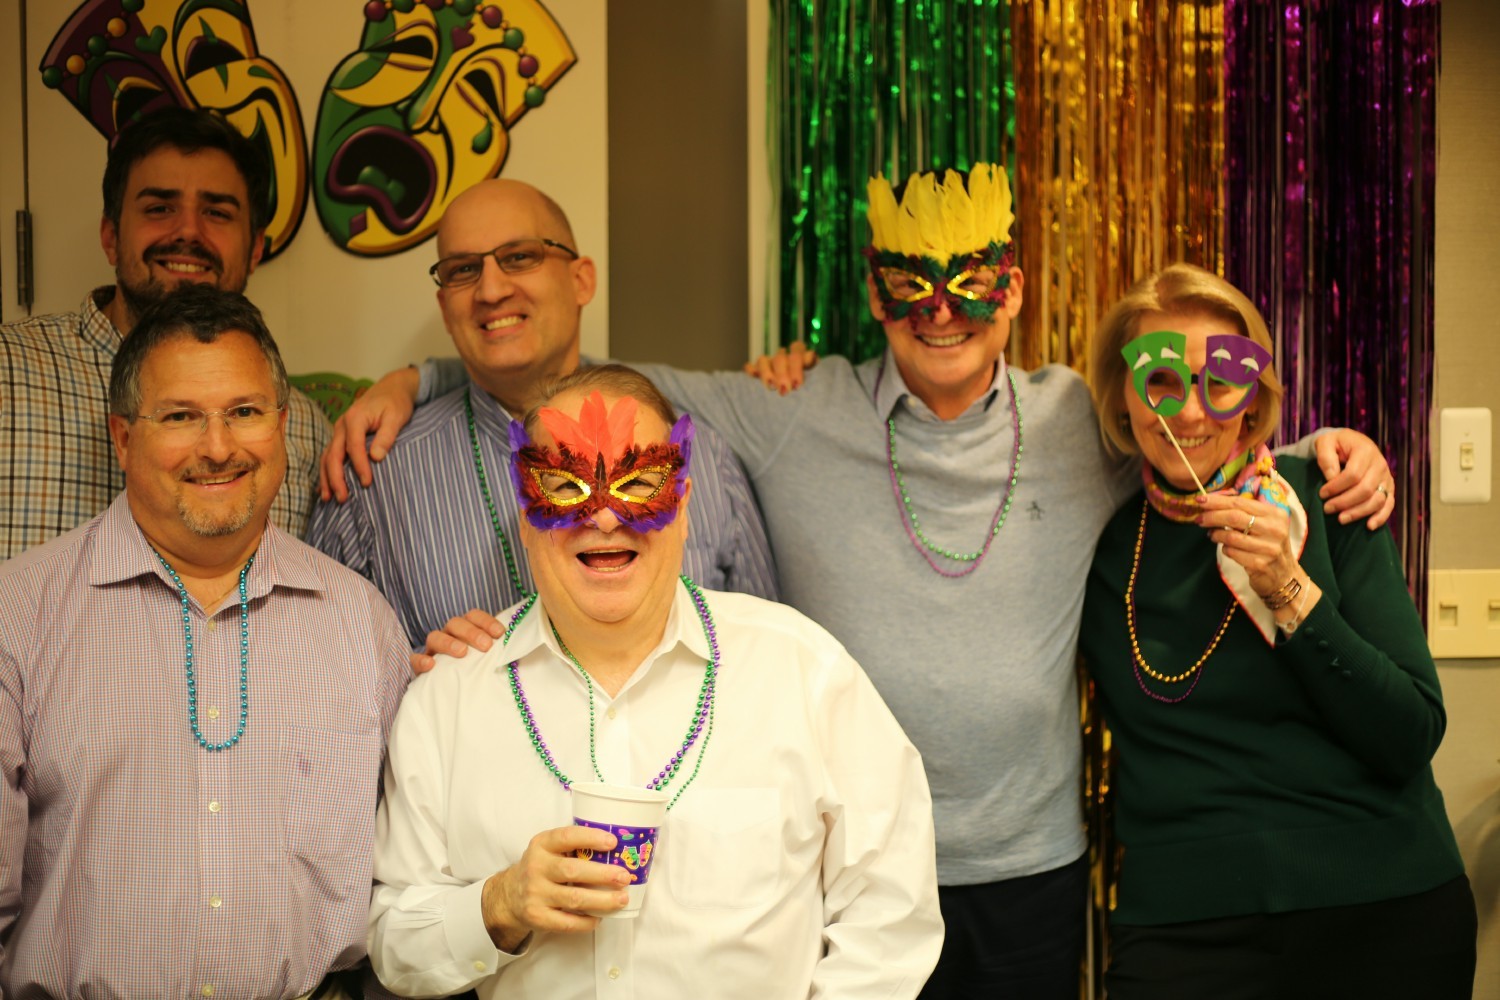 Members of our Align team getting jazzy and celebrating Mardi Gras at our annual party.